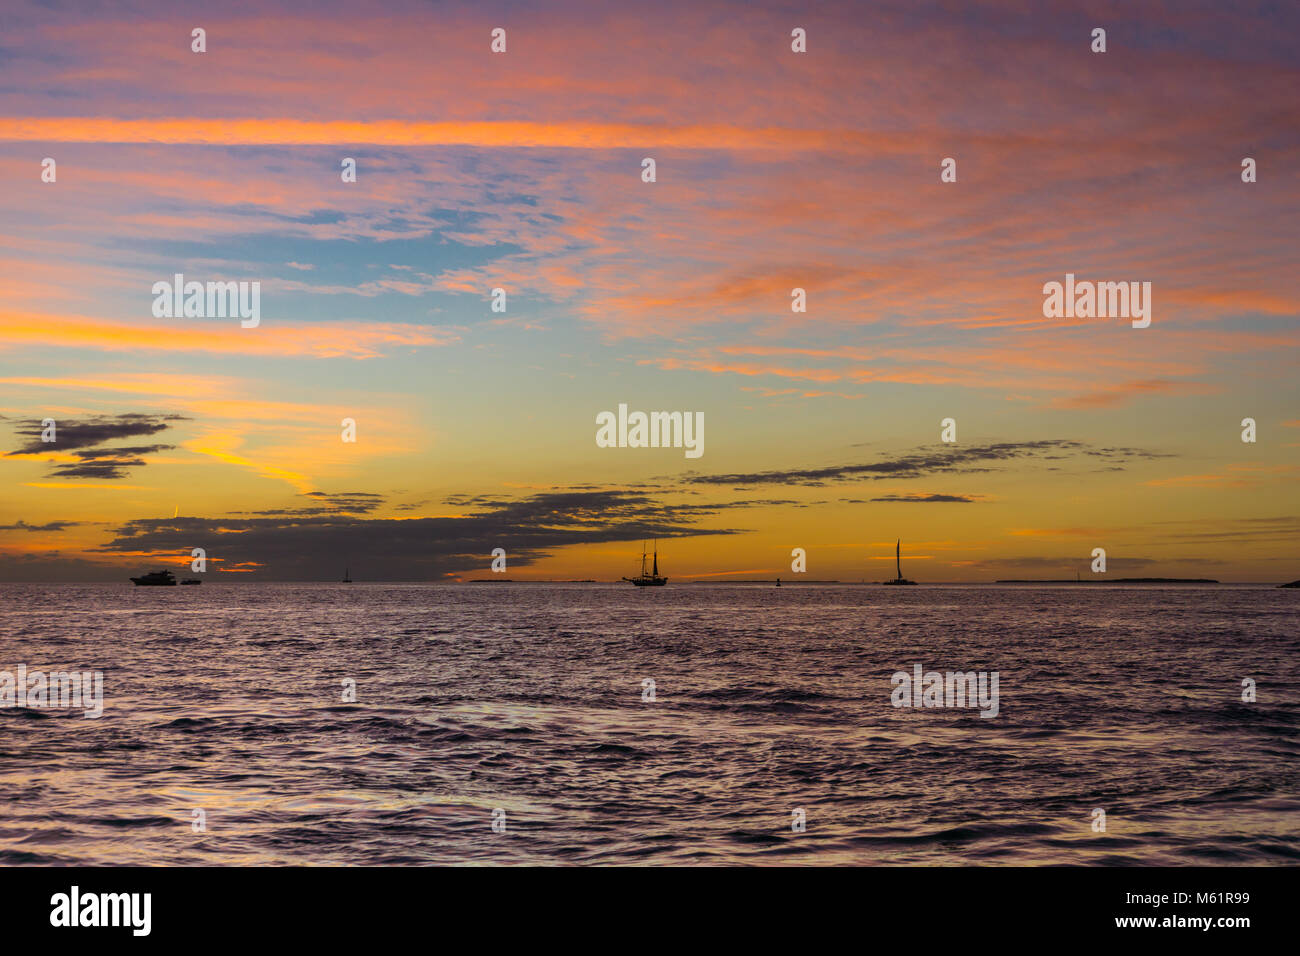 USA, Florida, Painted sky after sunset at beach with many boats on water Stock Photo